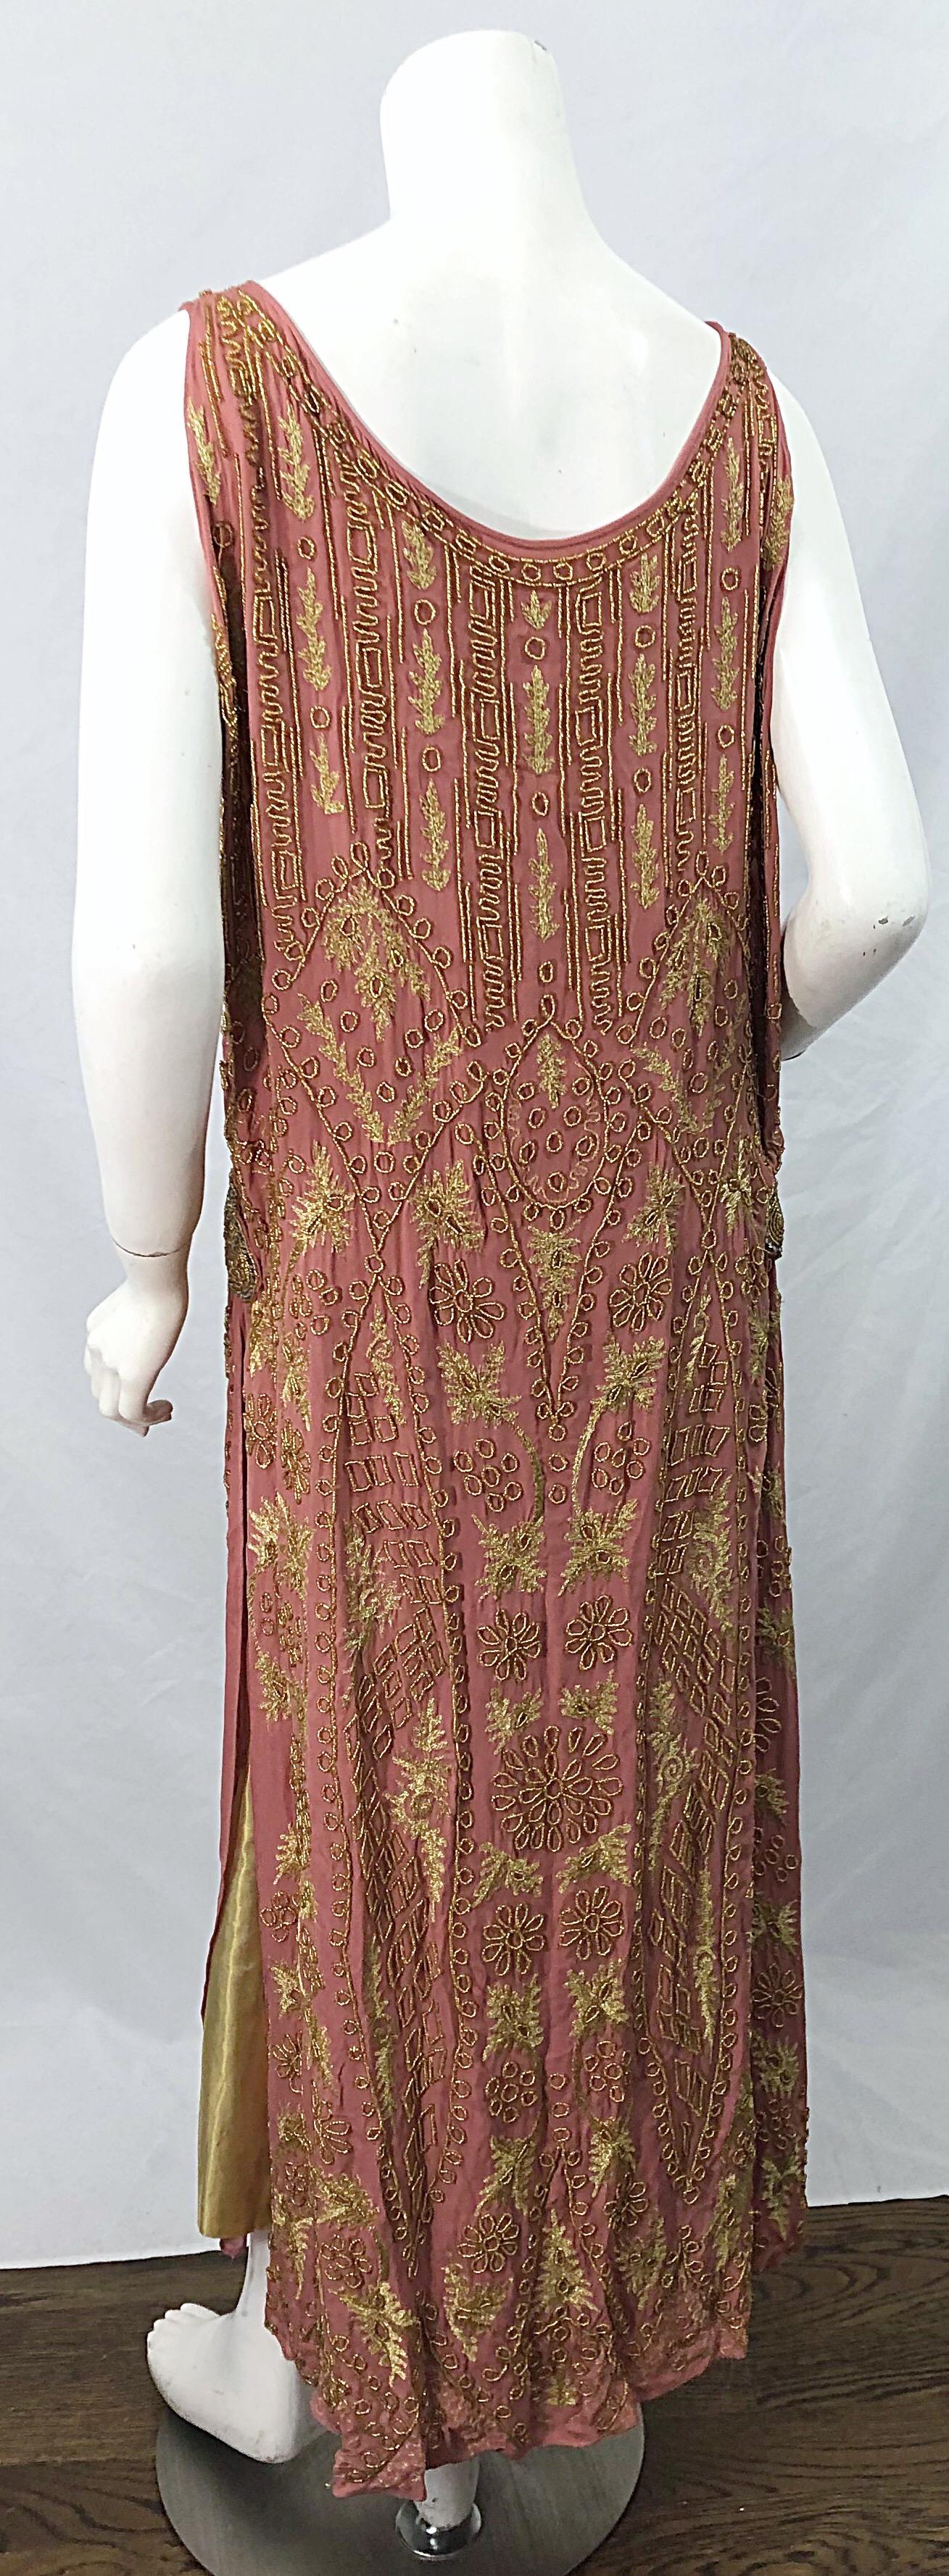 1920s French Couture Pink + Gold Beaded Gatsby Roaring 20s Vintage Flapper Dress 7